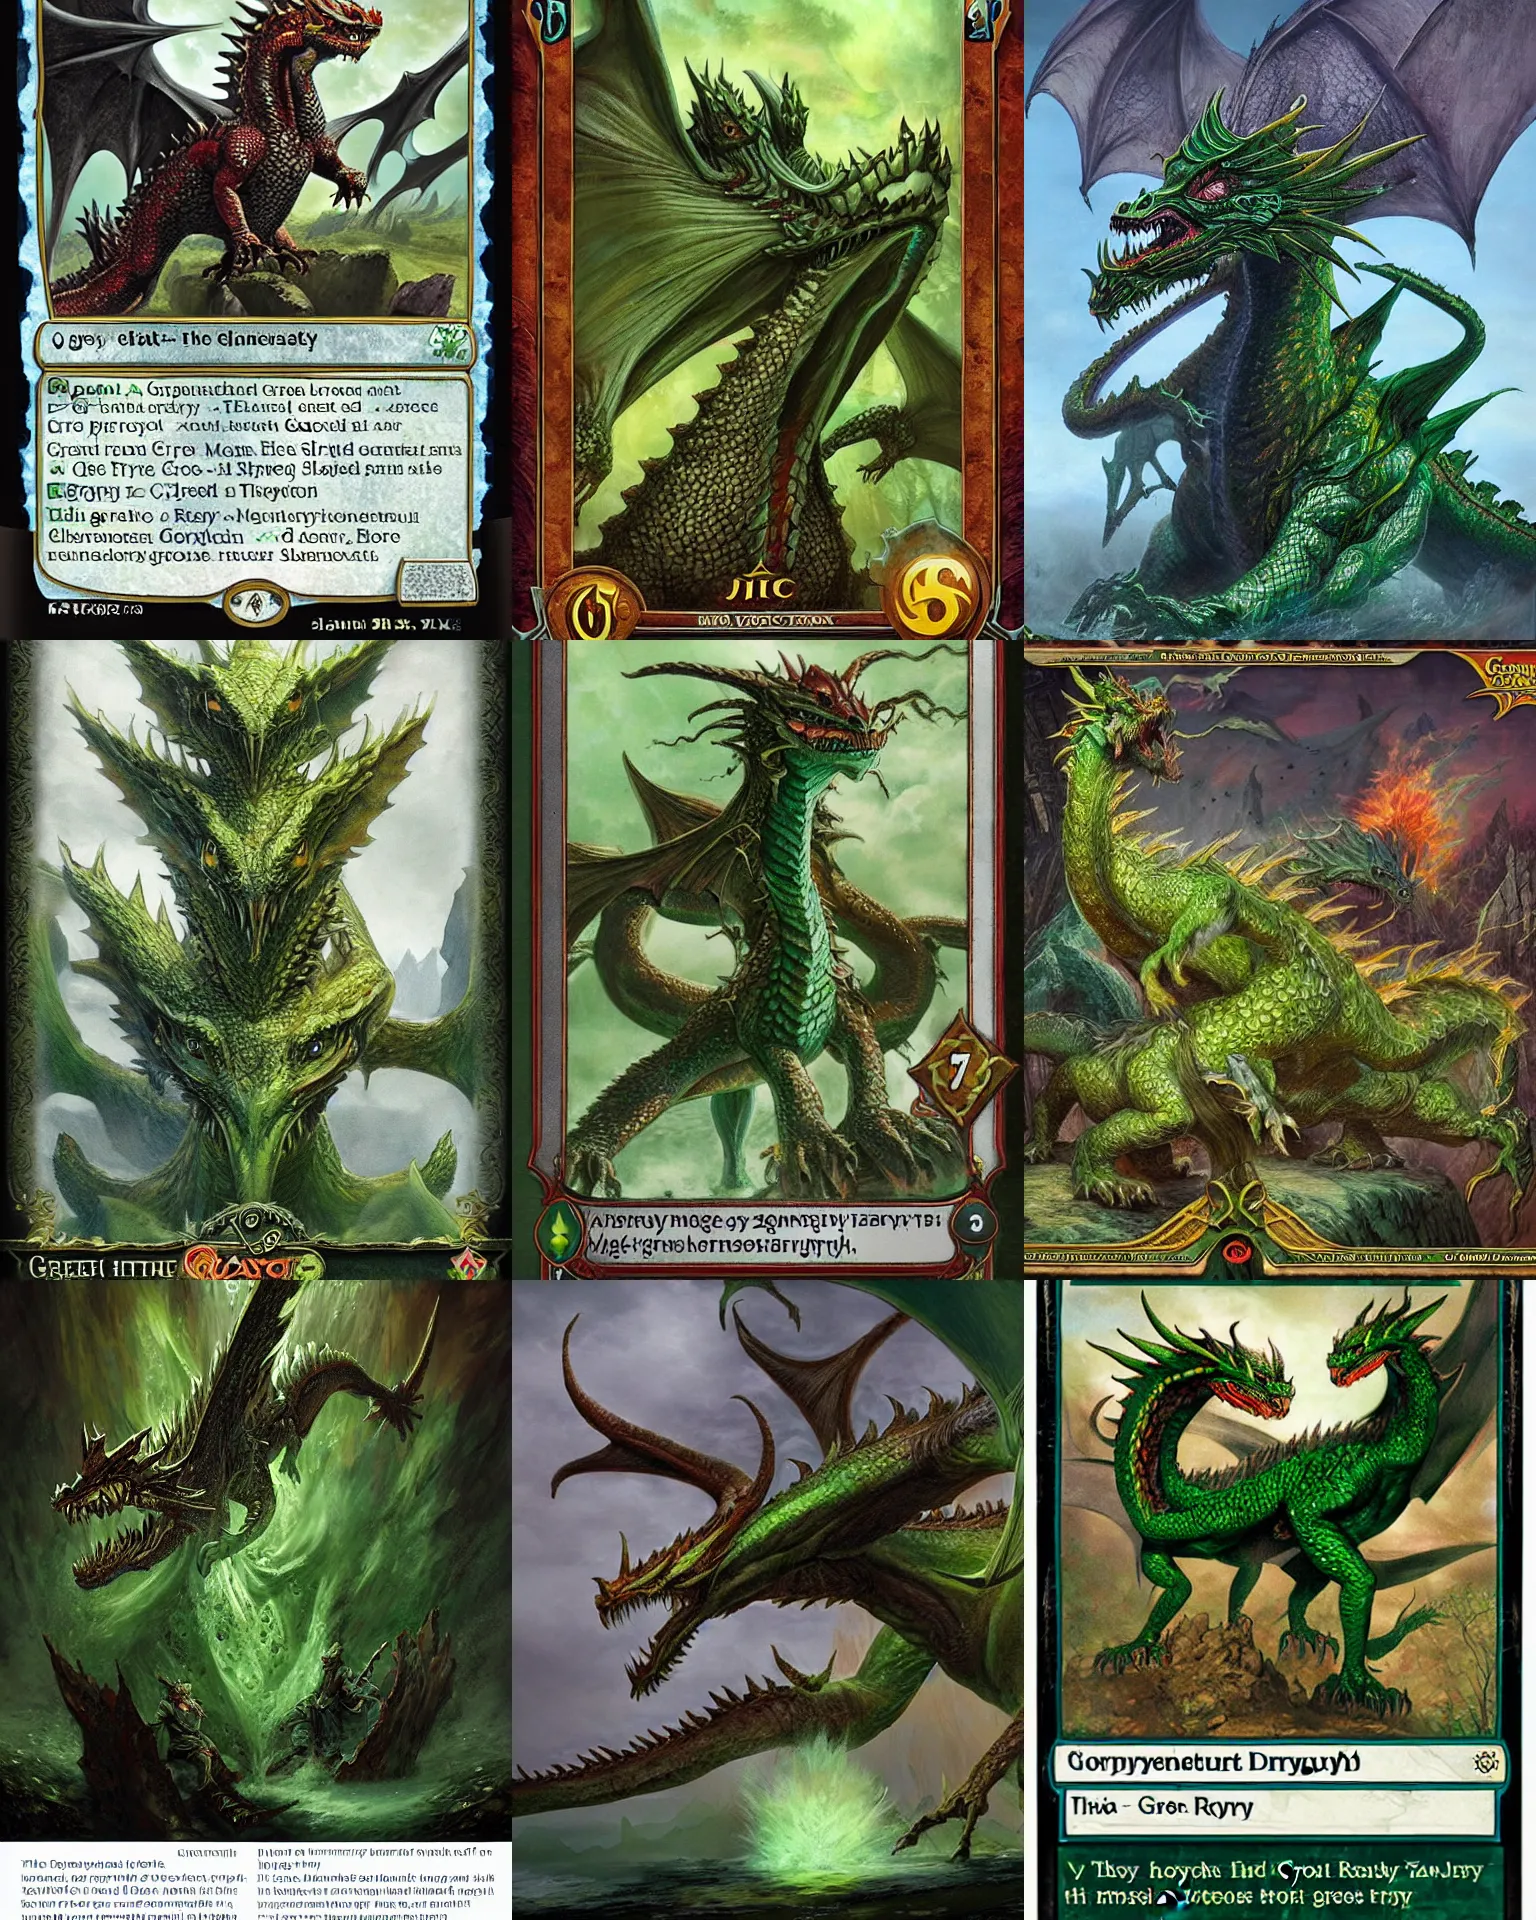 Prompt: a giant monster epic royal three - headed dragon zmej gorynych, slavic fairy - tale mythological green creature, magic : the gathering